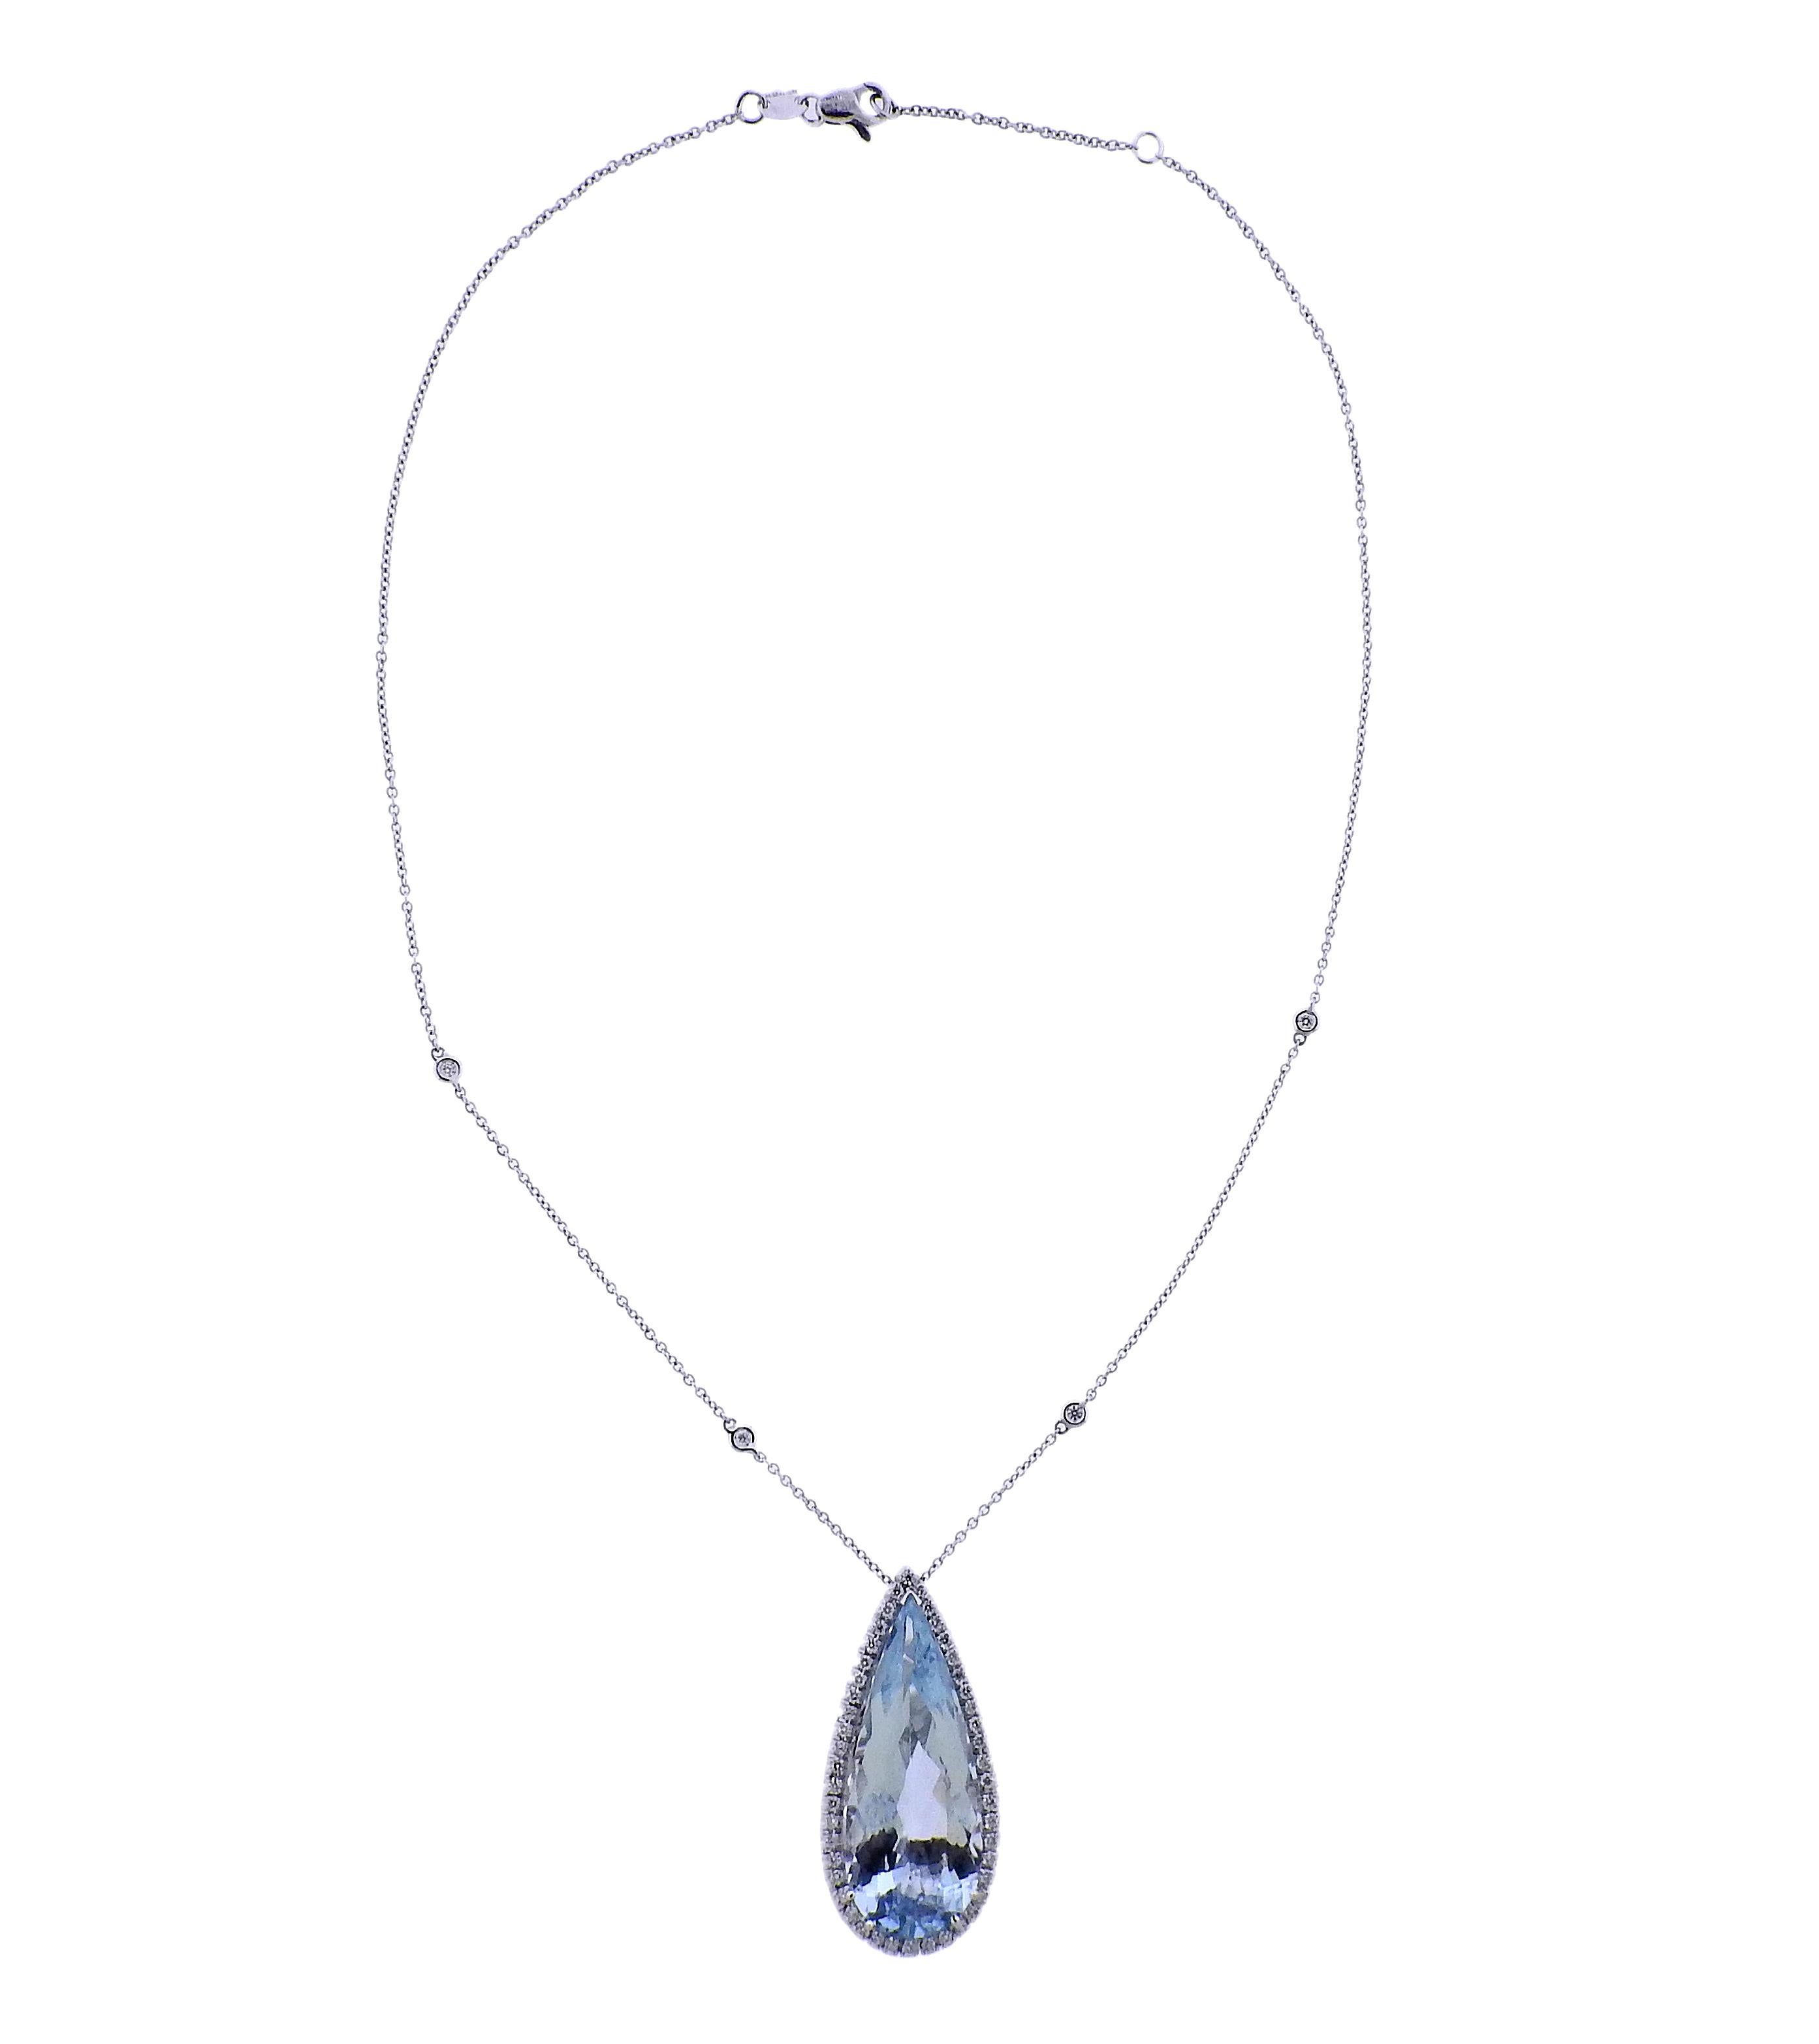 Brand new with tag Bucherer pendant necklace, with 25.41ct aquamarine and 0.76ctw G/VS diamonds. Comes with box. Necklace is 17